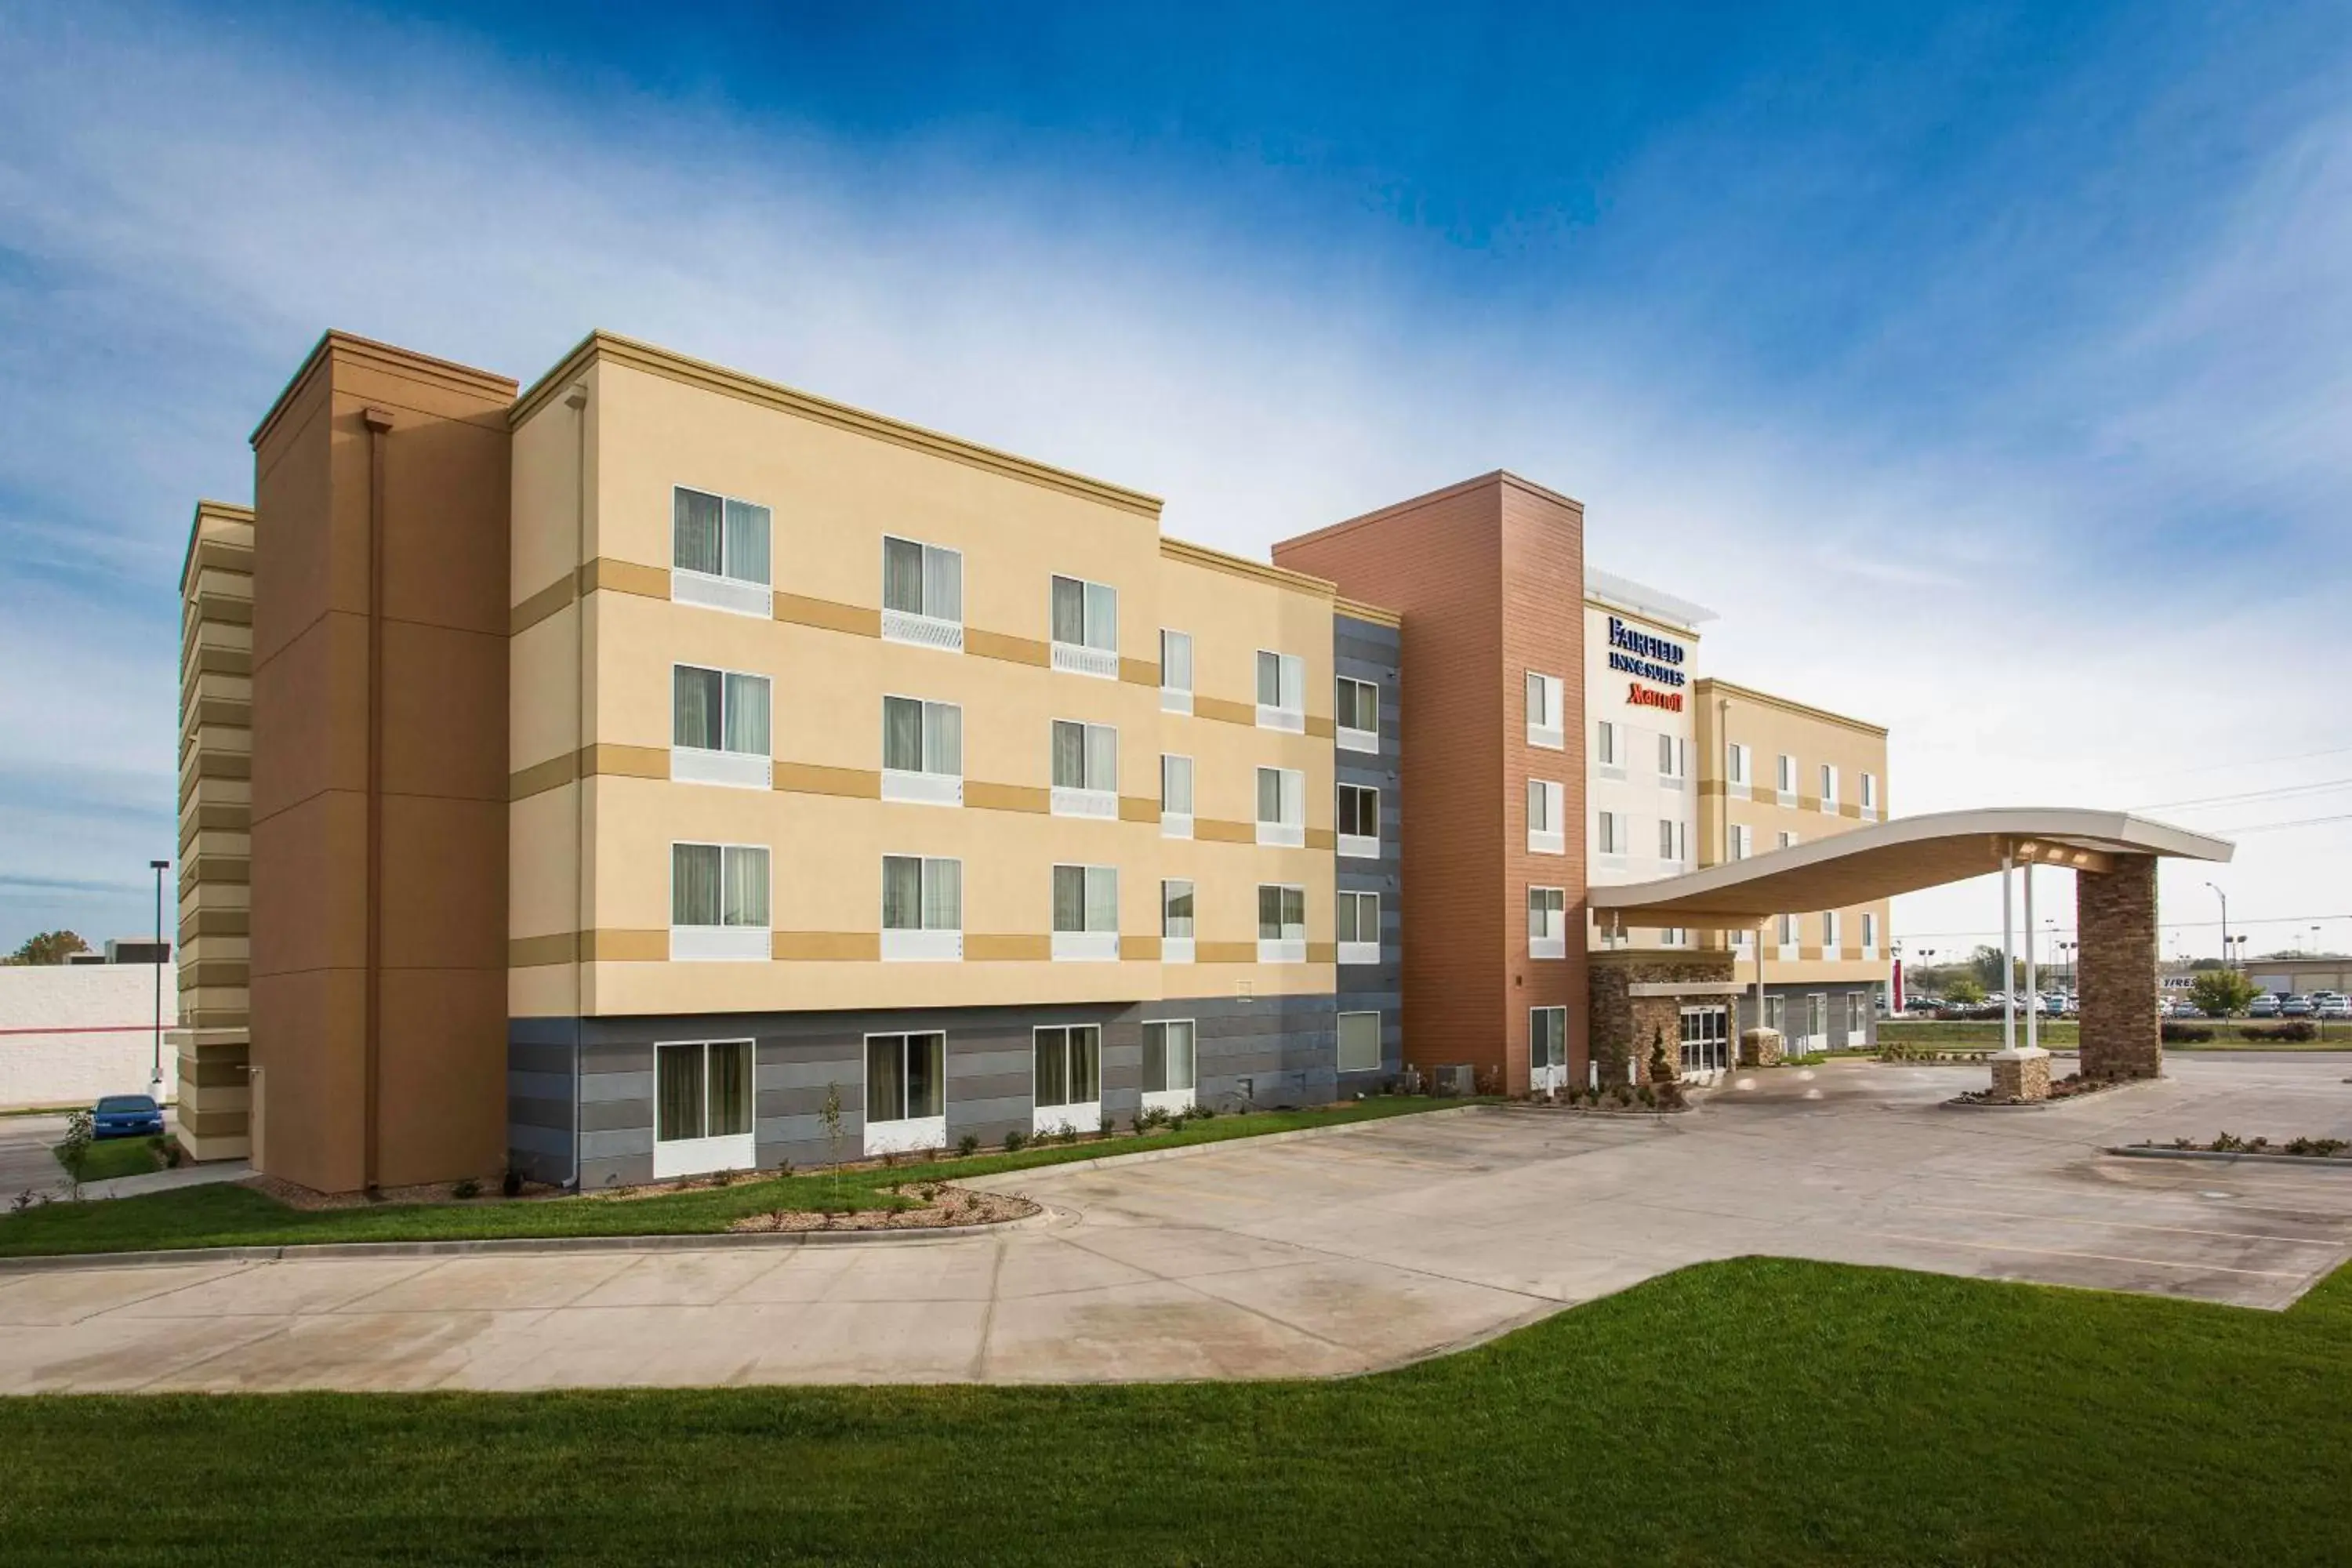 Property Building in Fairfield Inn and Suites Hutchinson